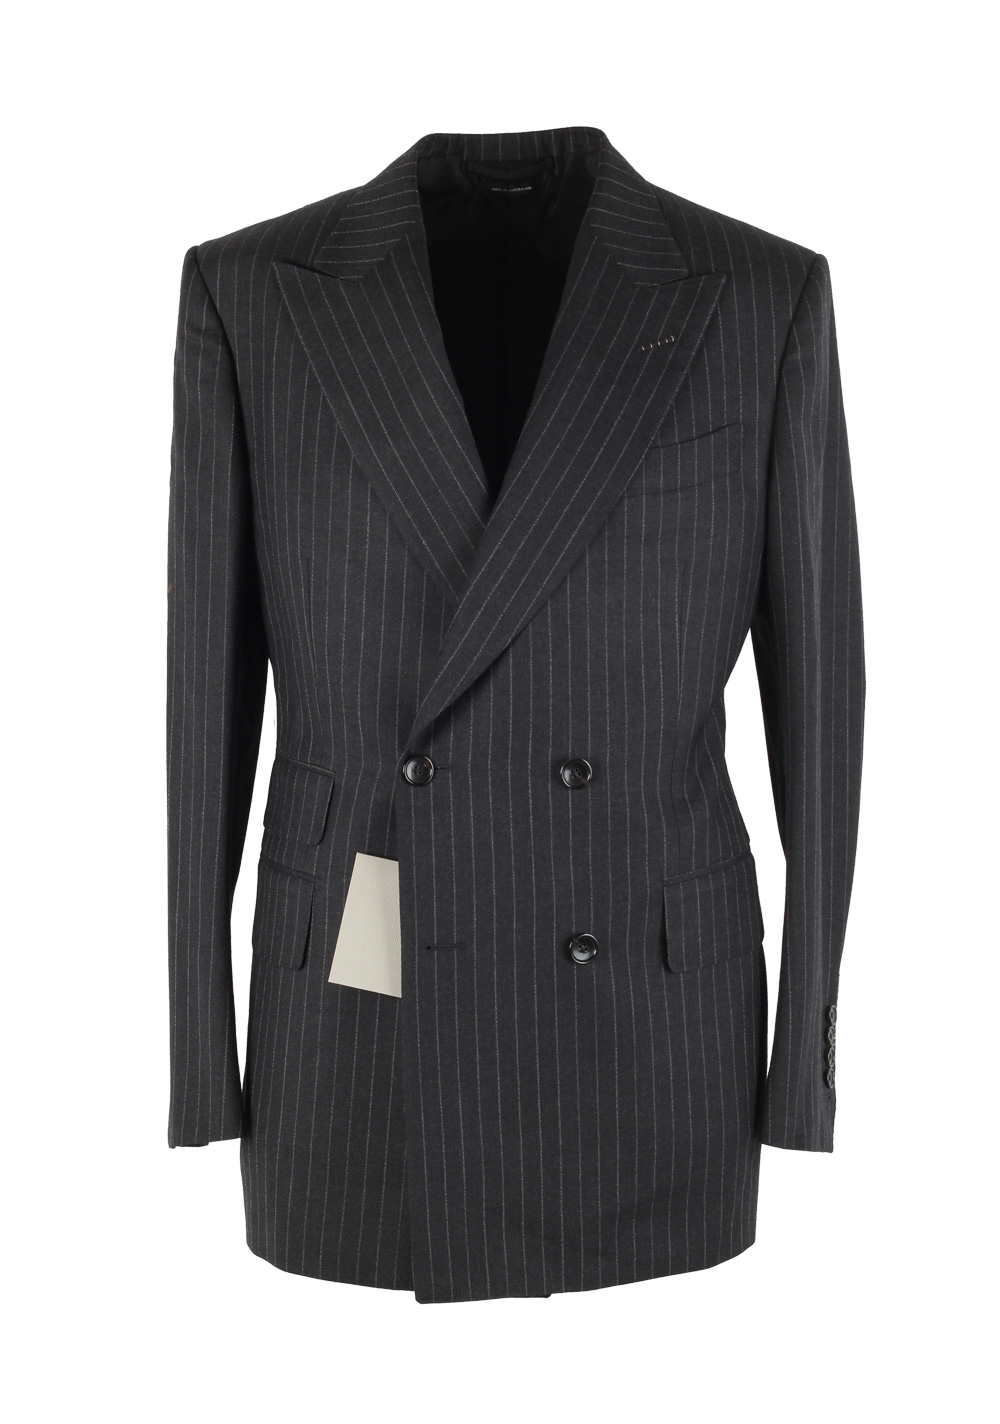 TOM FORD Shelton Double Breasted Striped Gray Sport Coat Size 48 / 38R ...